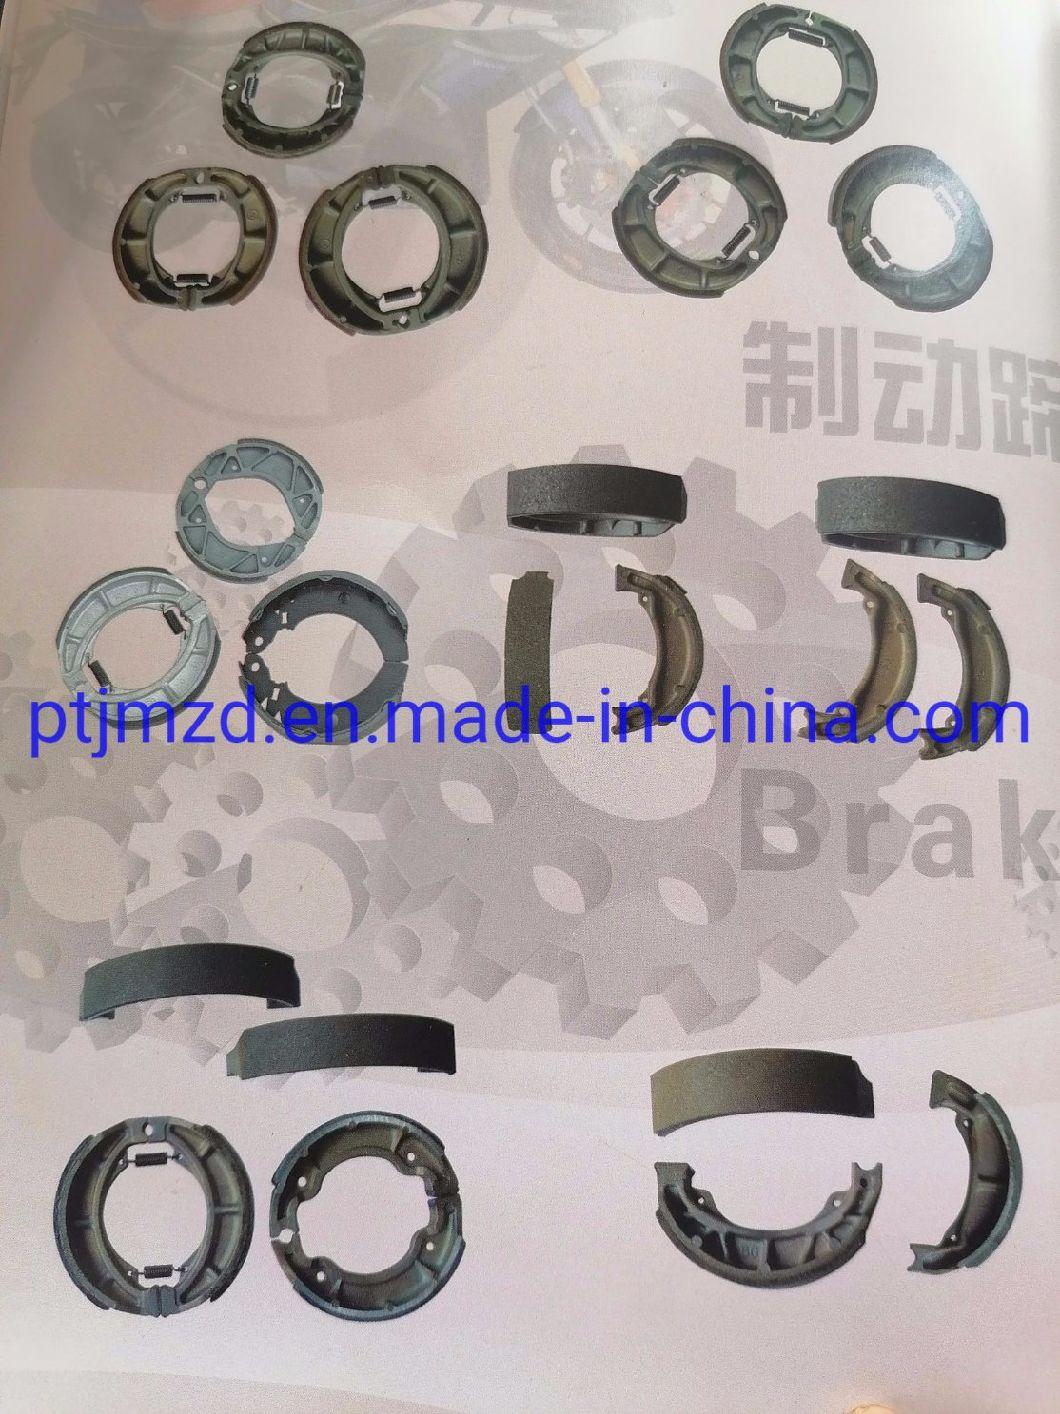 Motorcycle Brake Shoes. Motorcycle Parts, Auto Spare Part--Qj50q-9A